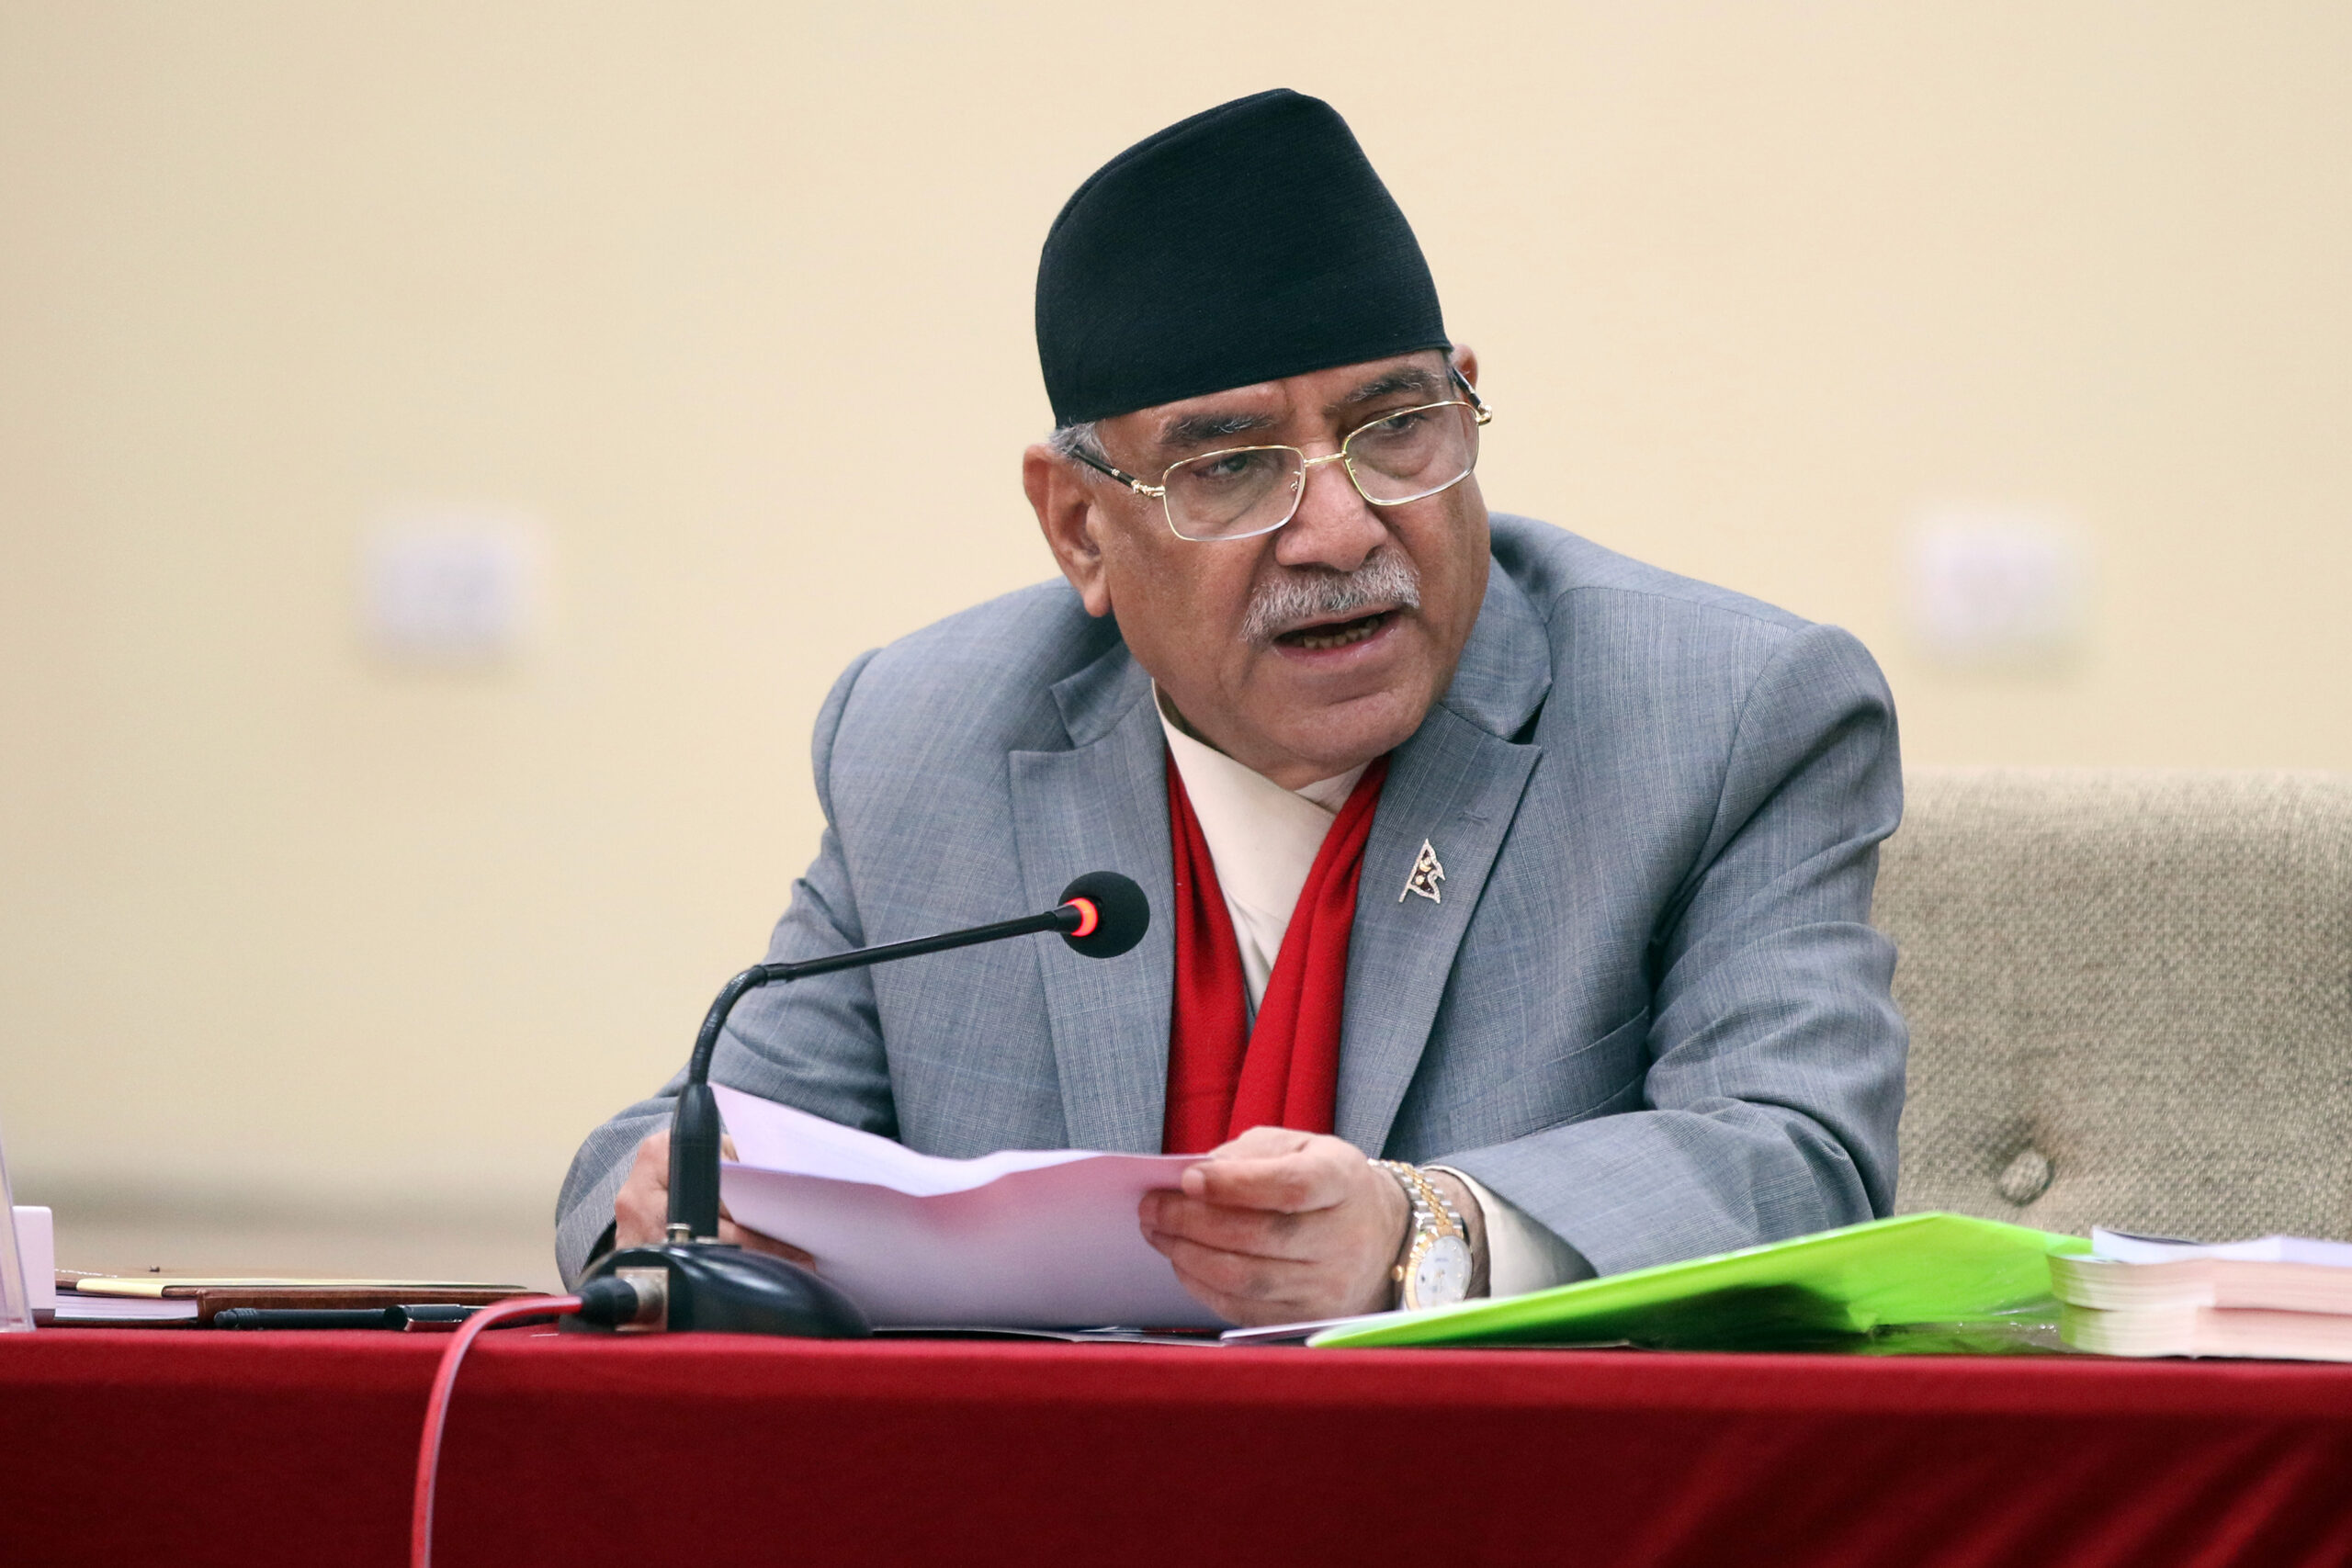 Developing sense of unity vital for national security: PM Dahal